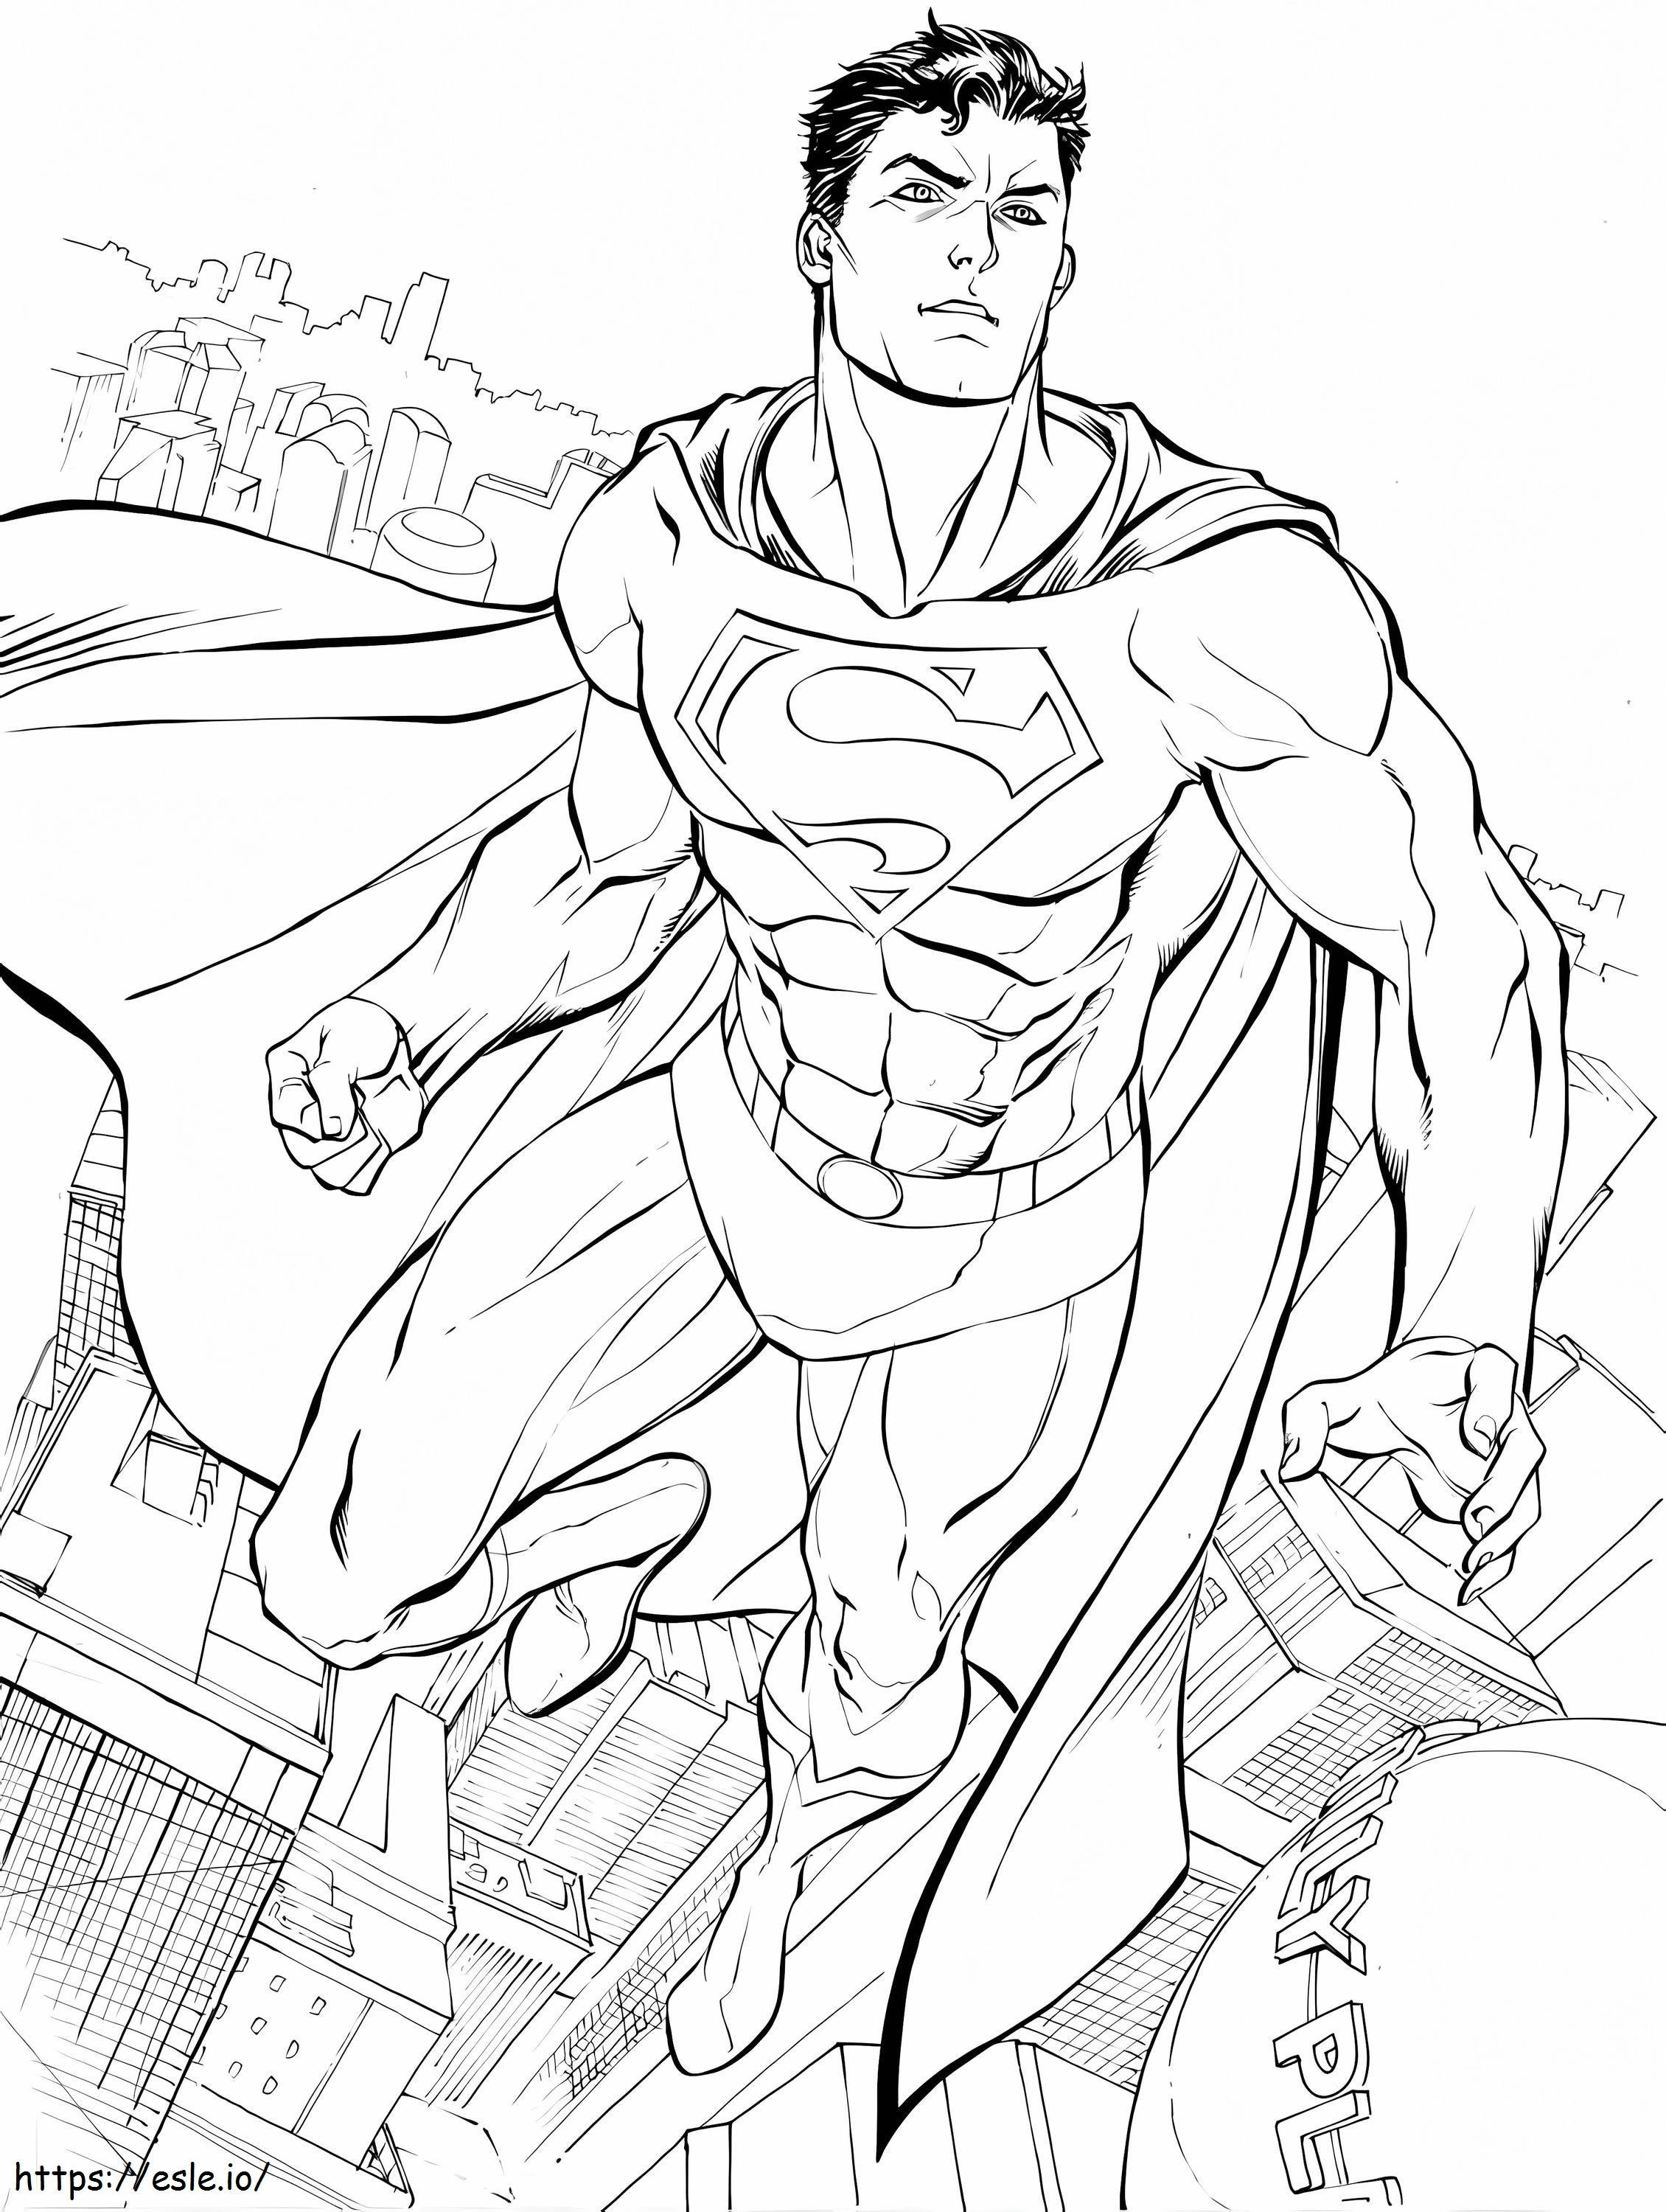 Young Superman coloring page